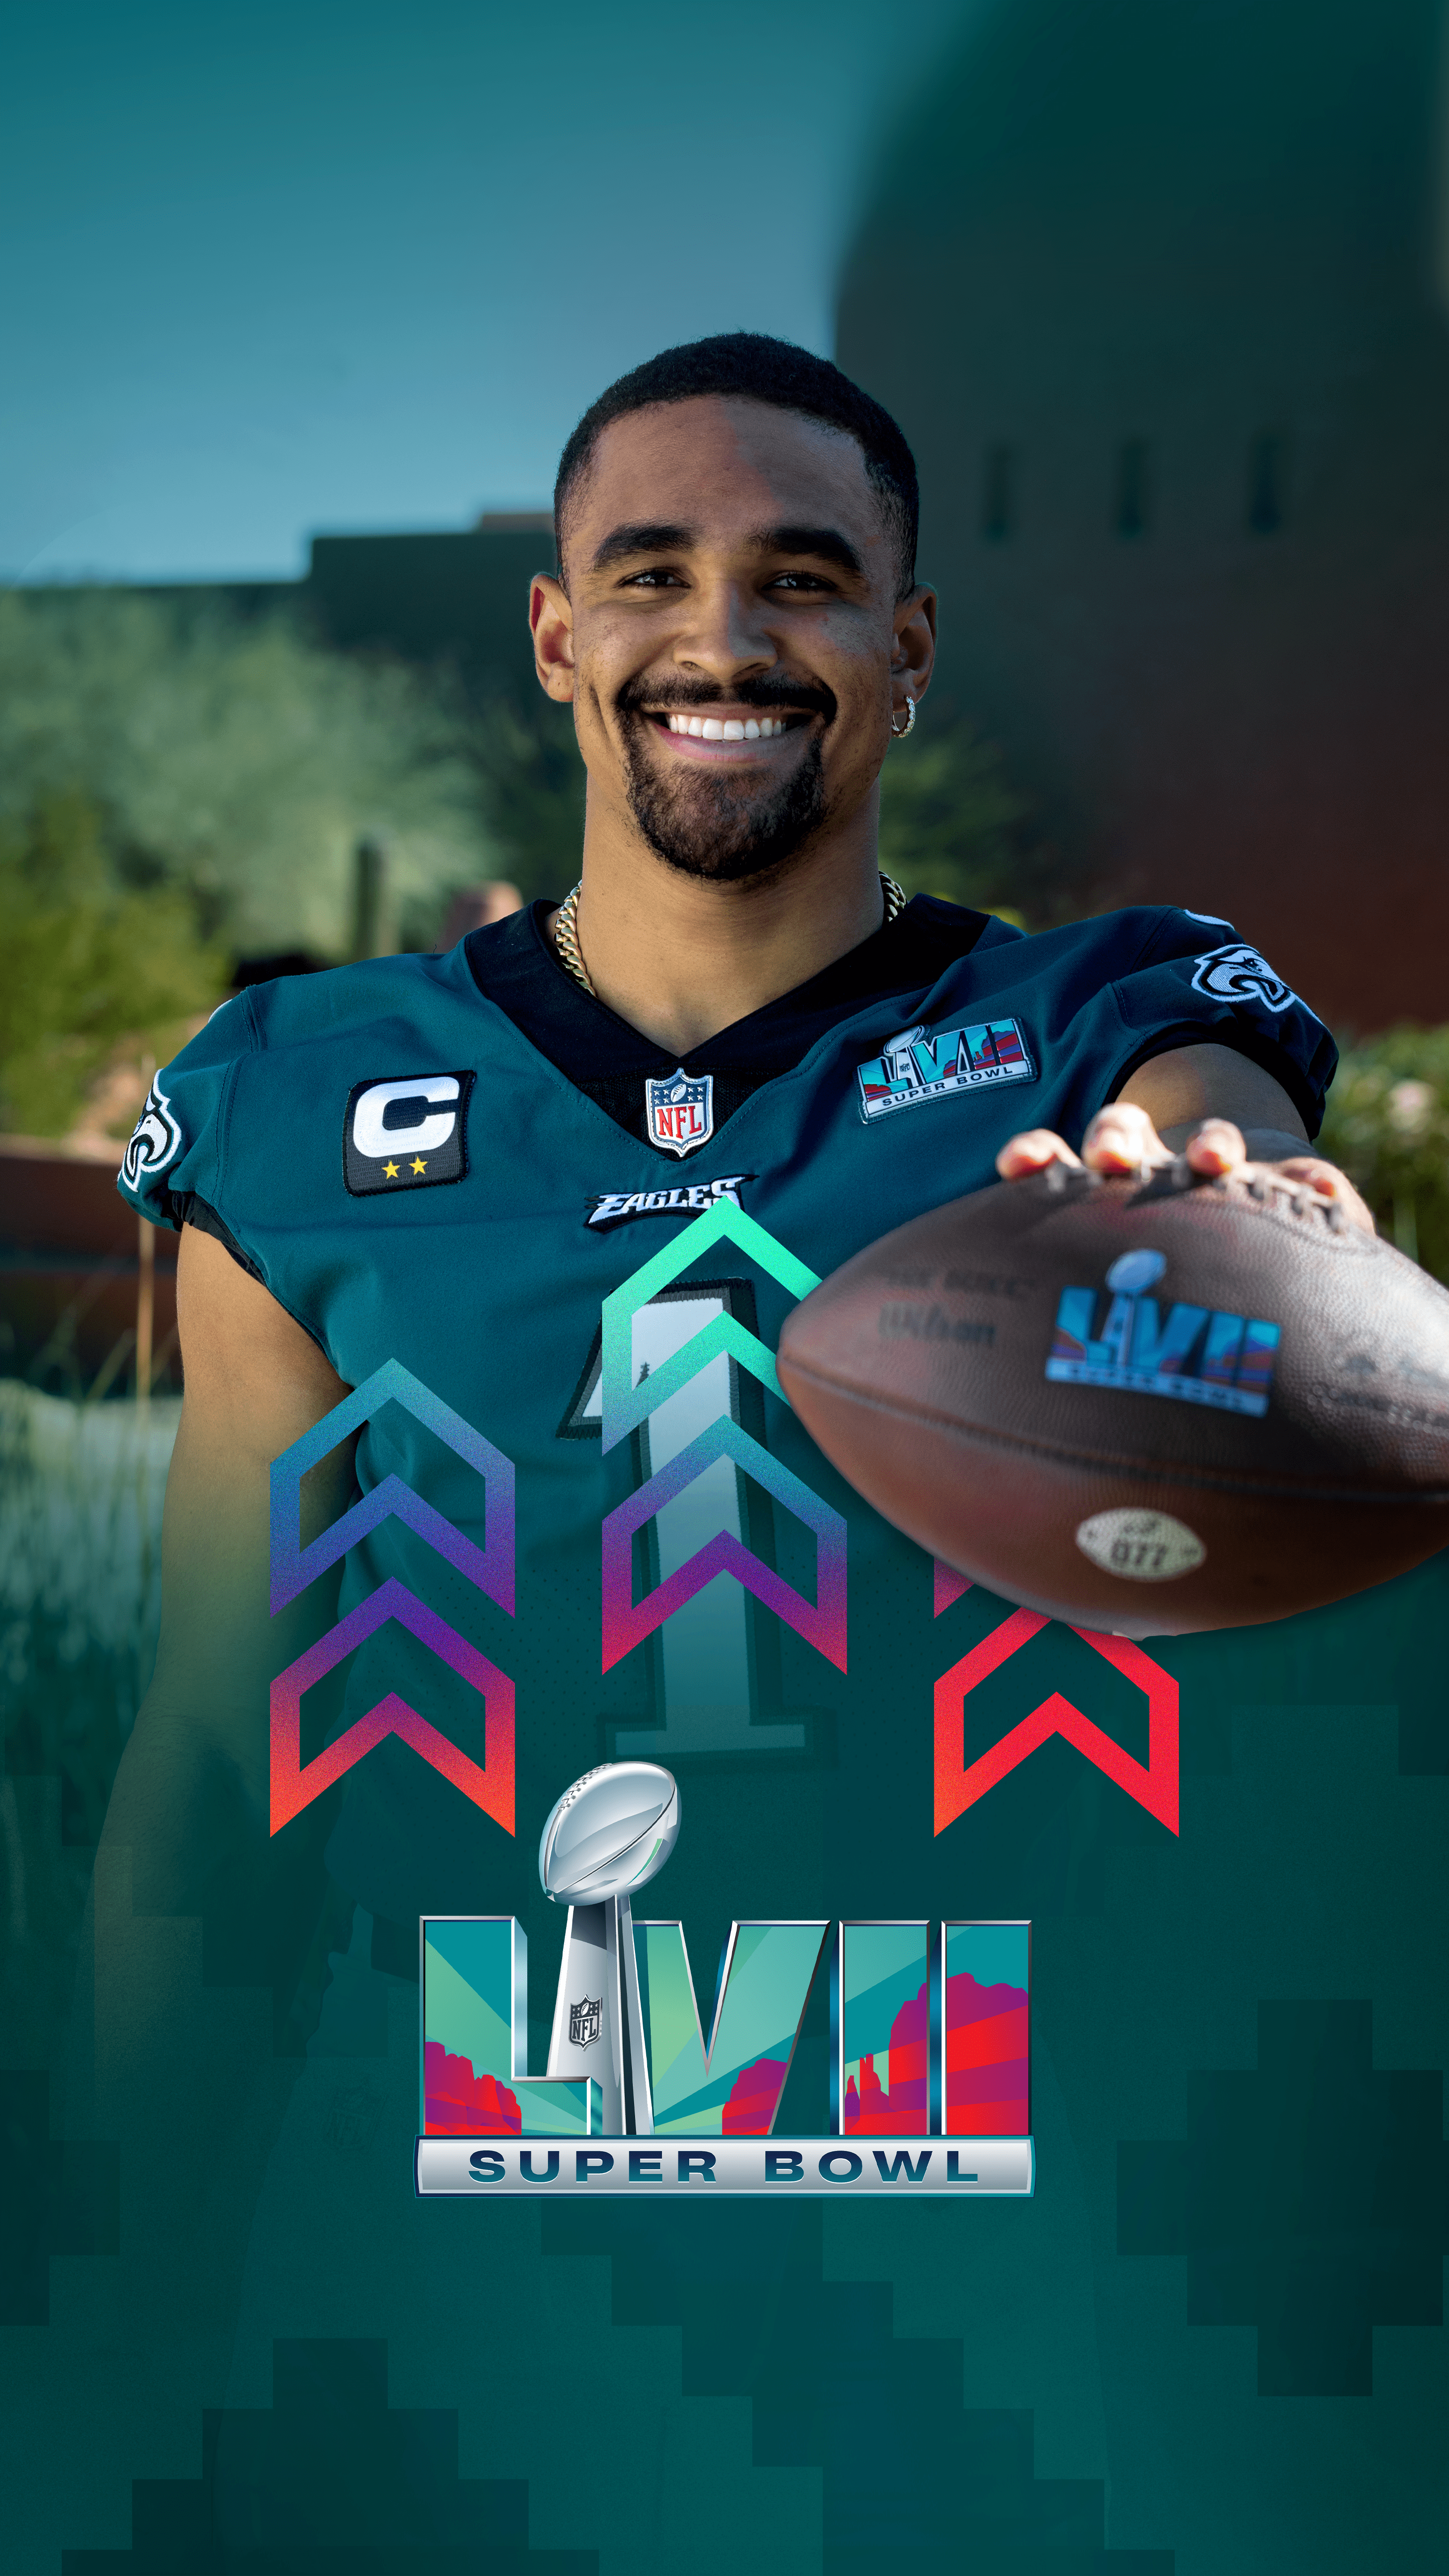 Mobile wallpaper to get the season started right : r/eagles